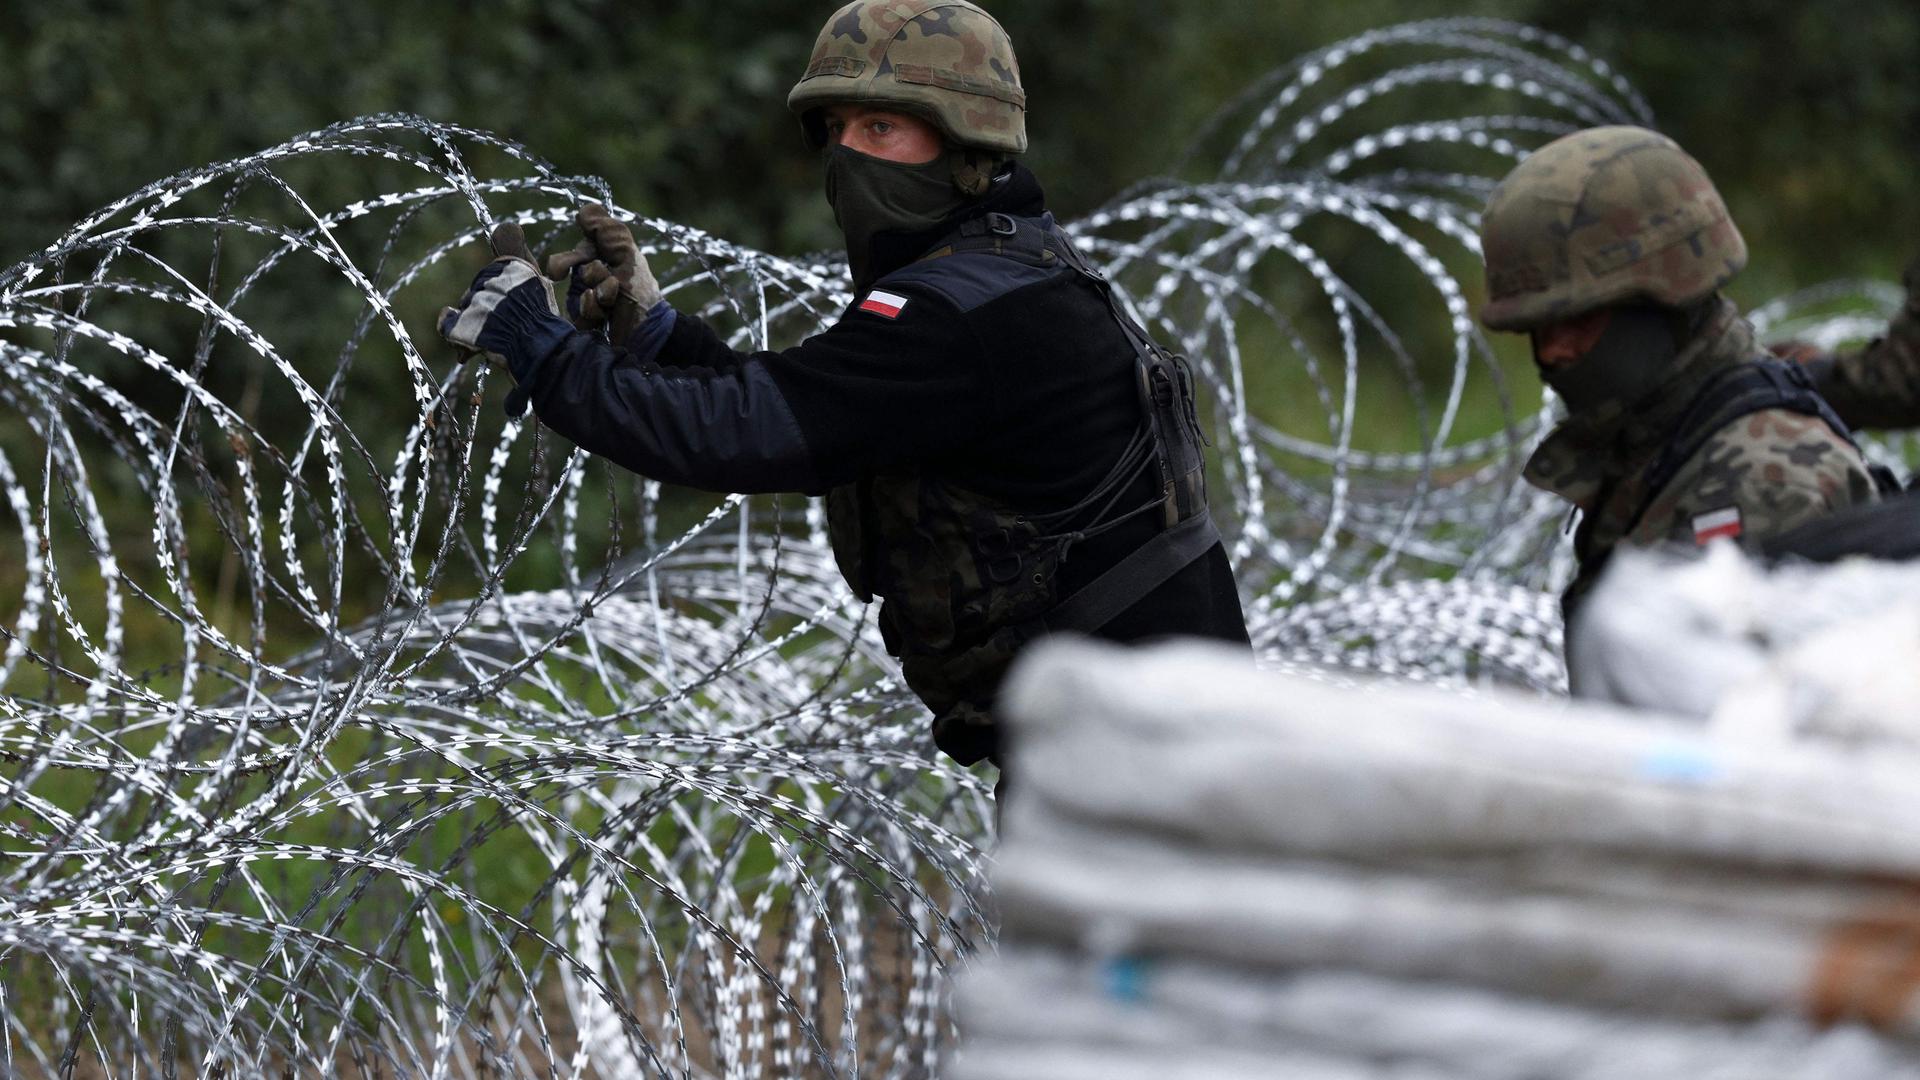 Polish soldiers construct a barbed wire fence on the border with Belarus in Zubrzyca Wielka near Bialystok, eastern Poland on August 26, 202